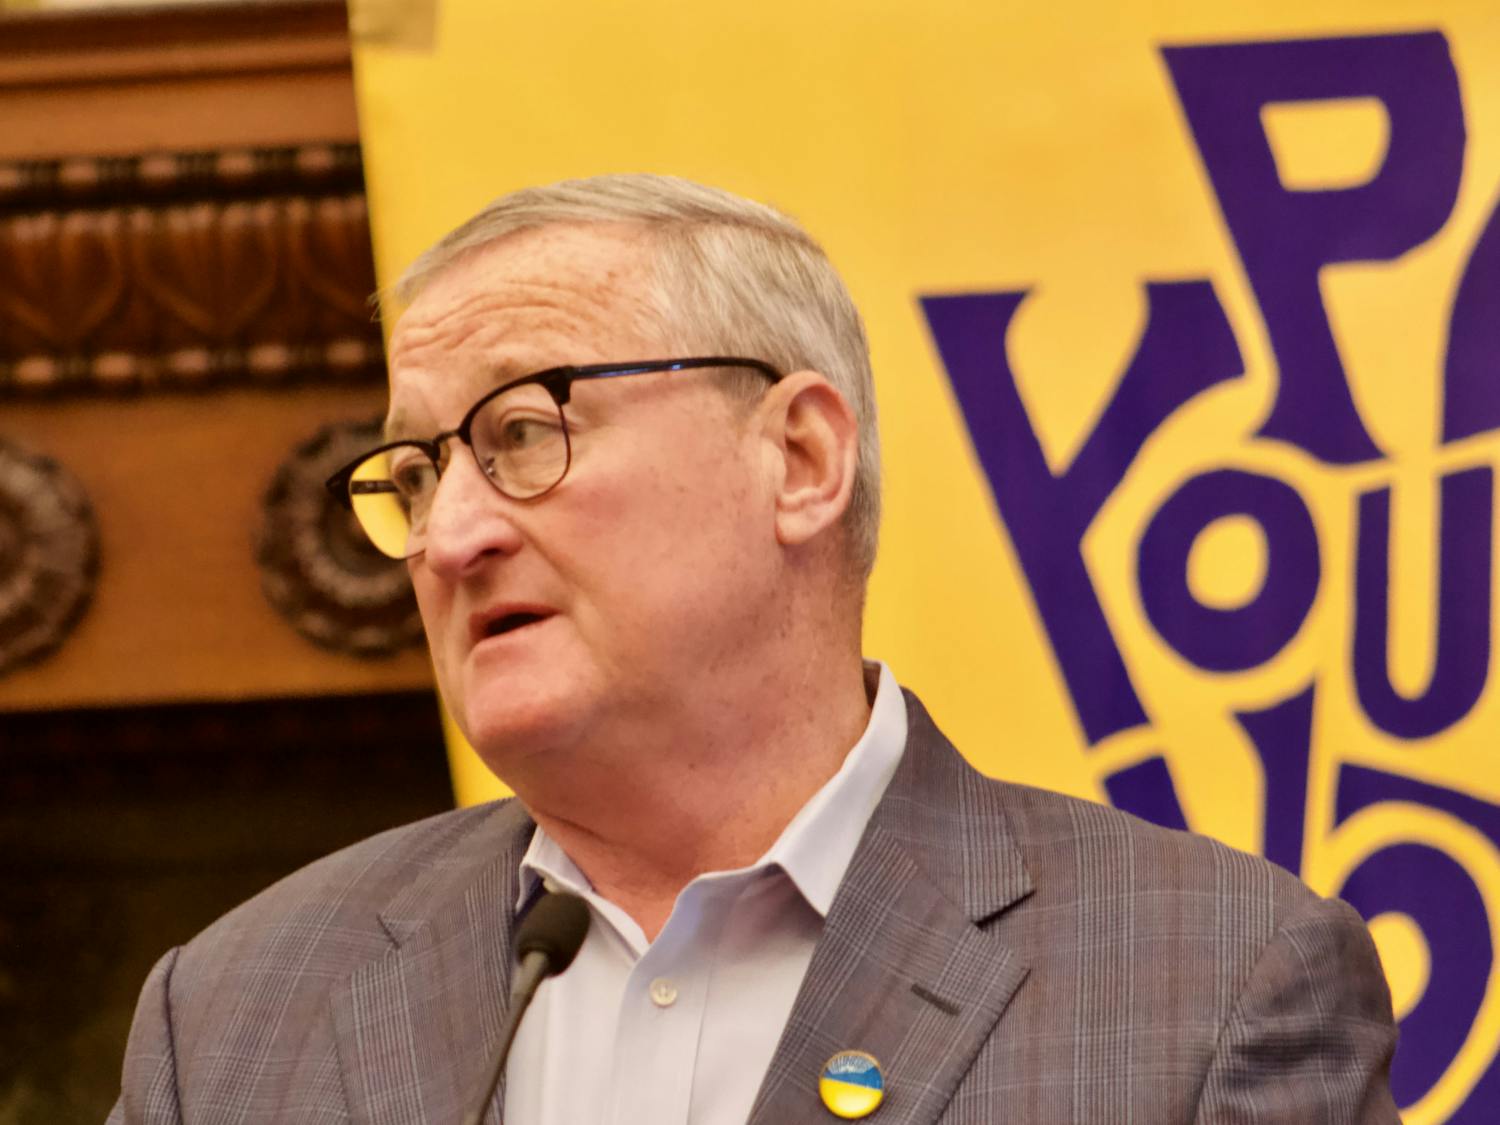 Mayor Jim Kenney speaking at City Hall event hosted by PA Youth Vote and the Office of Youth Engagement | (Kasey Shamis/Bullhorn Photographer)